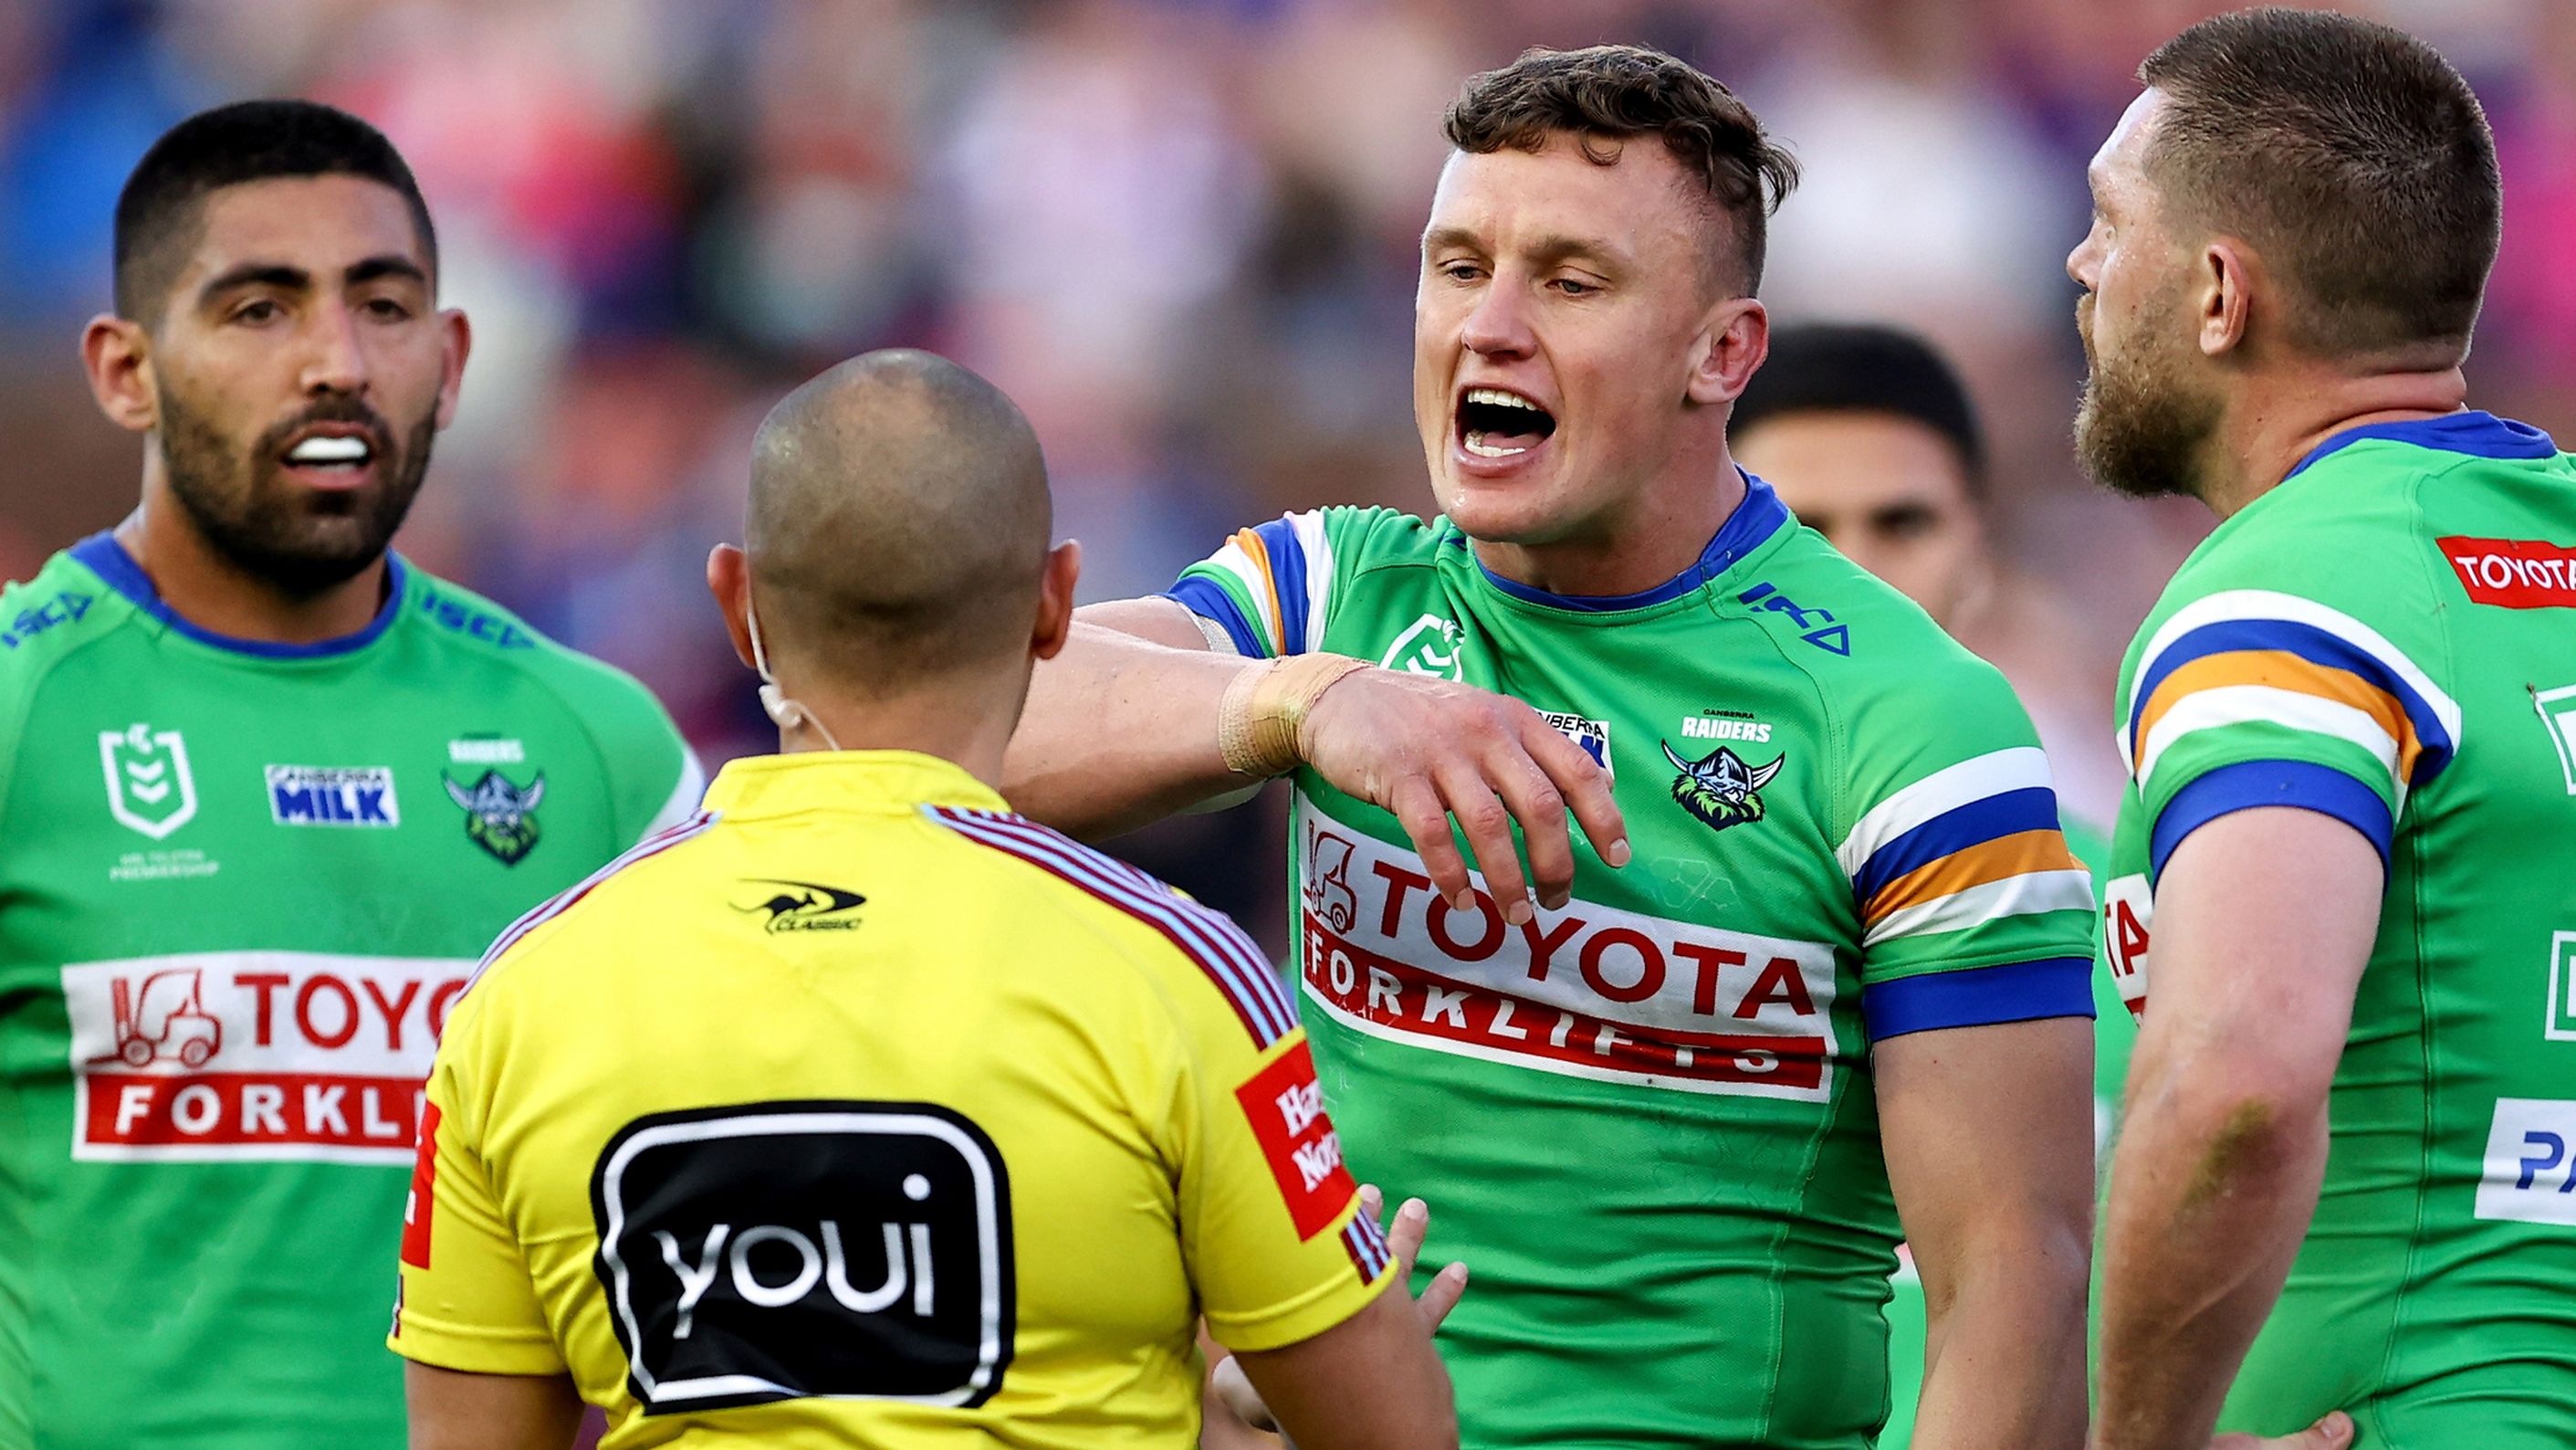 NRL head of football explains why Jack Wighton was not sin binned or sent off after biting complaint